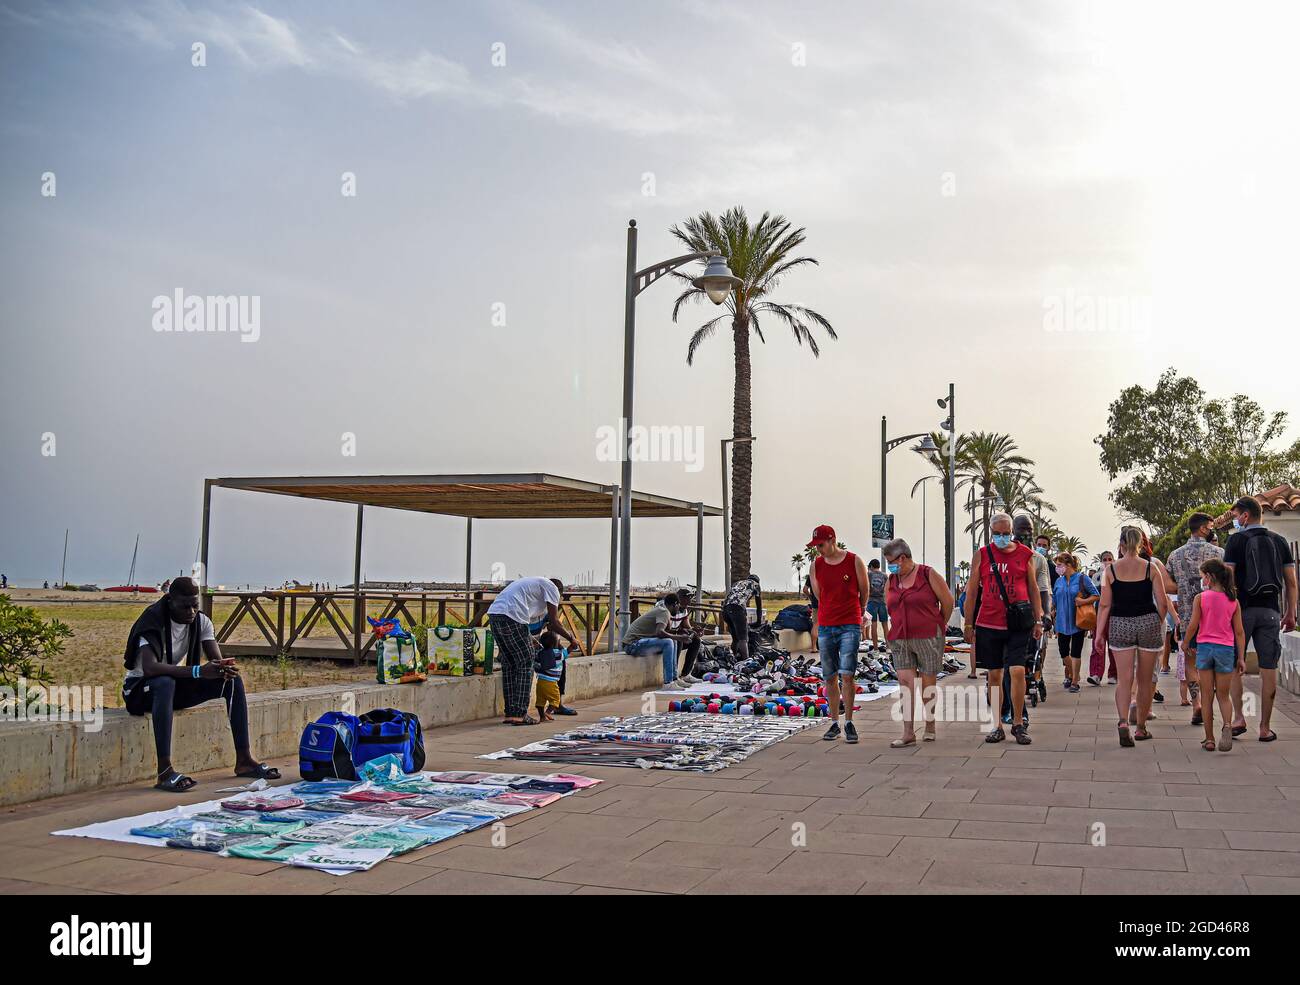 People walk in front of the stalls with blankets on the ground covered with  illegal products along Paseo Maritimo Street in Vendrell. Illegal street  vendors known as "manteros" or "Top Manta", mostly